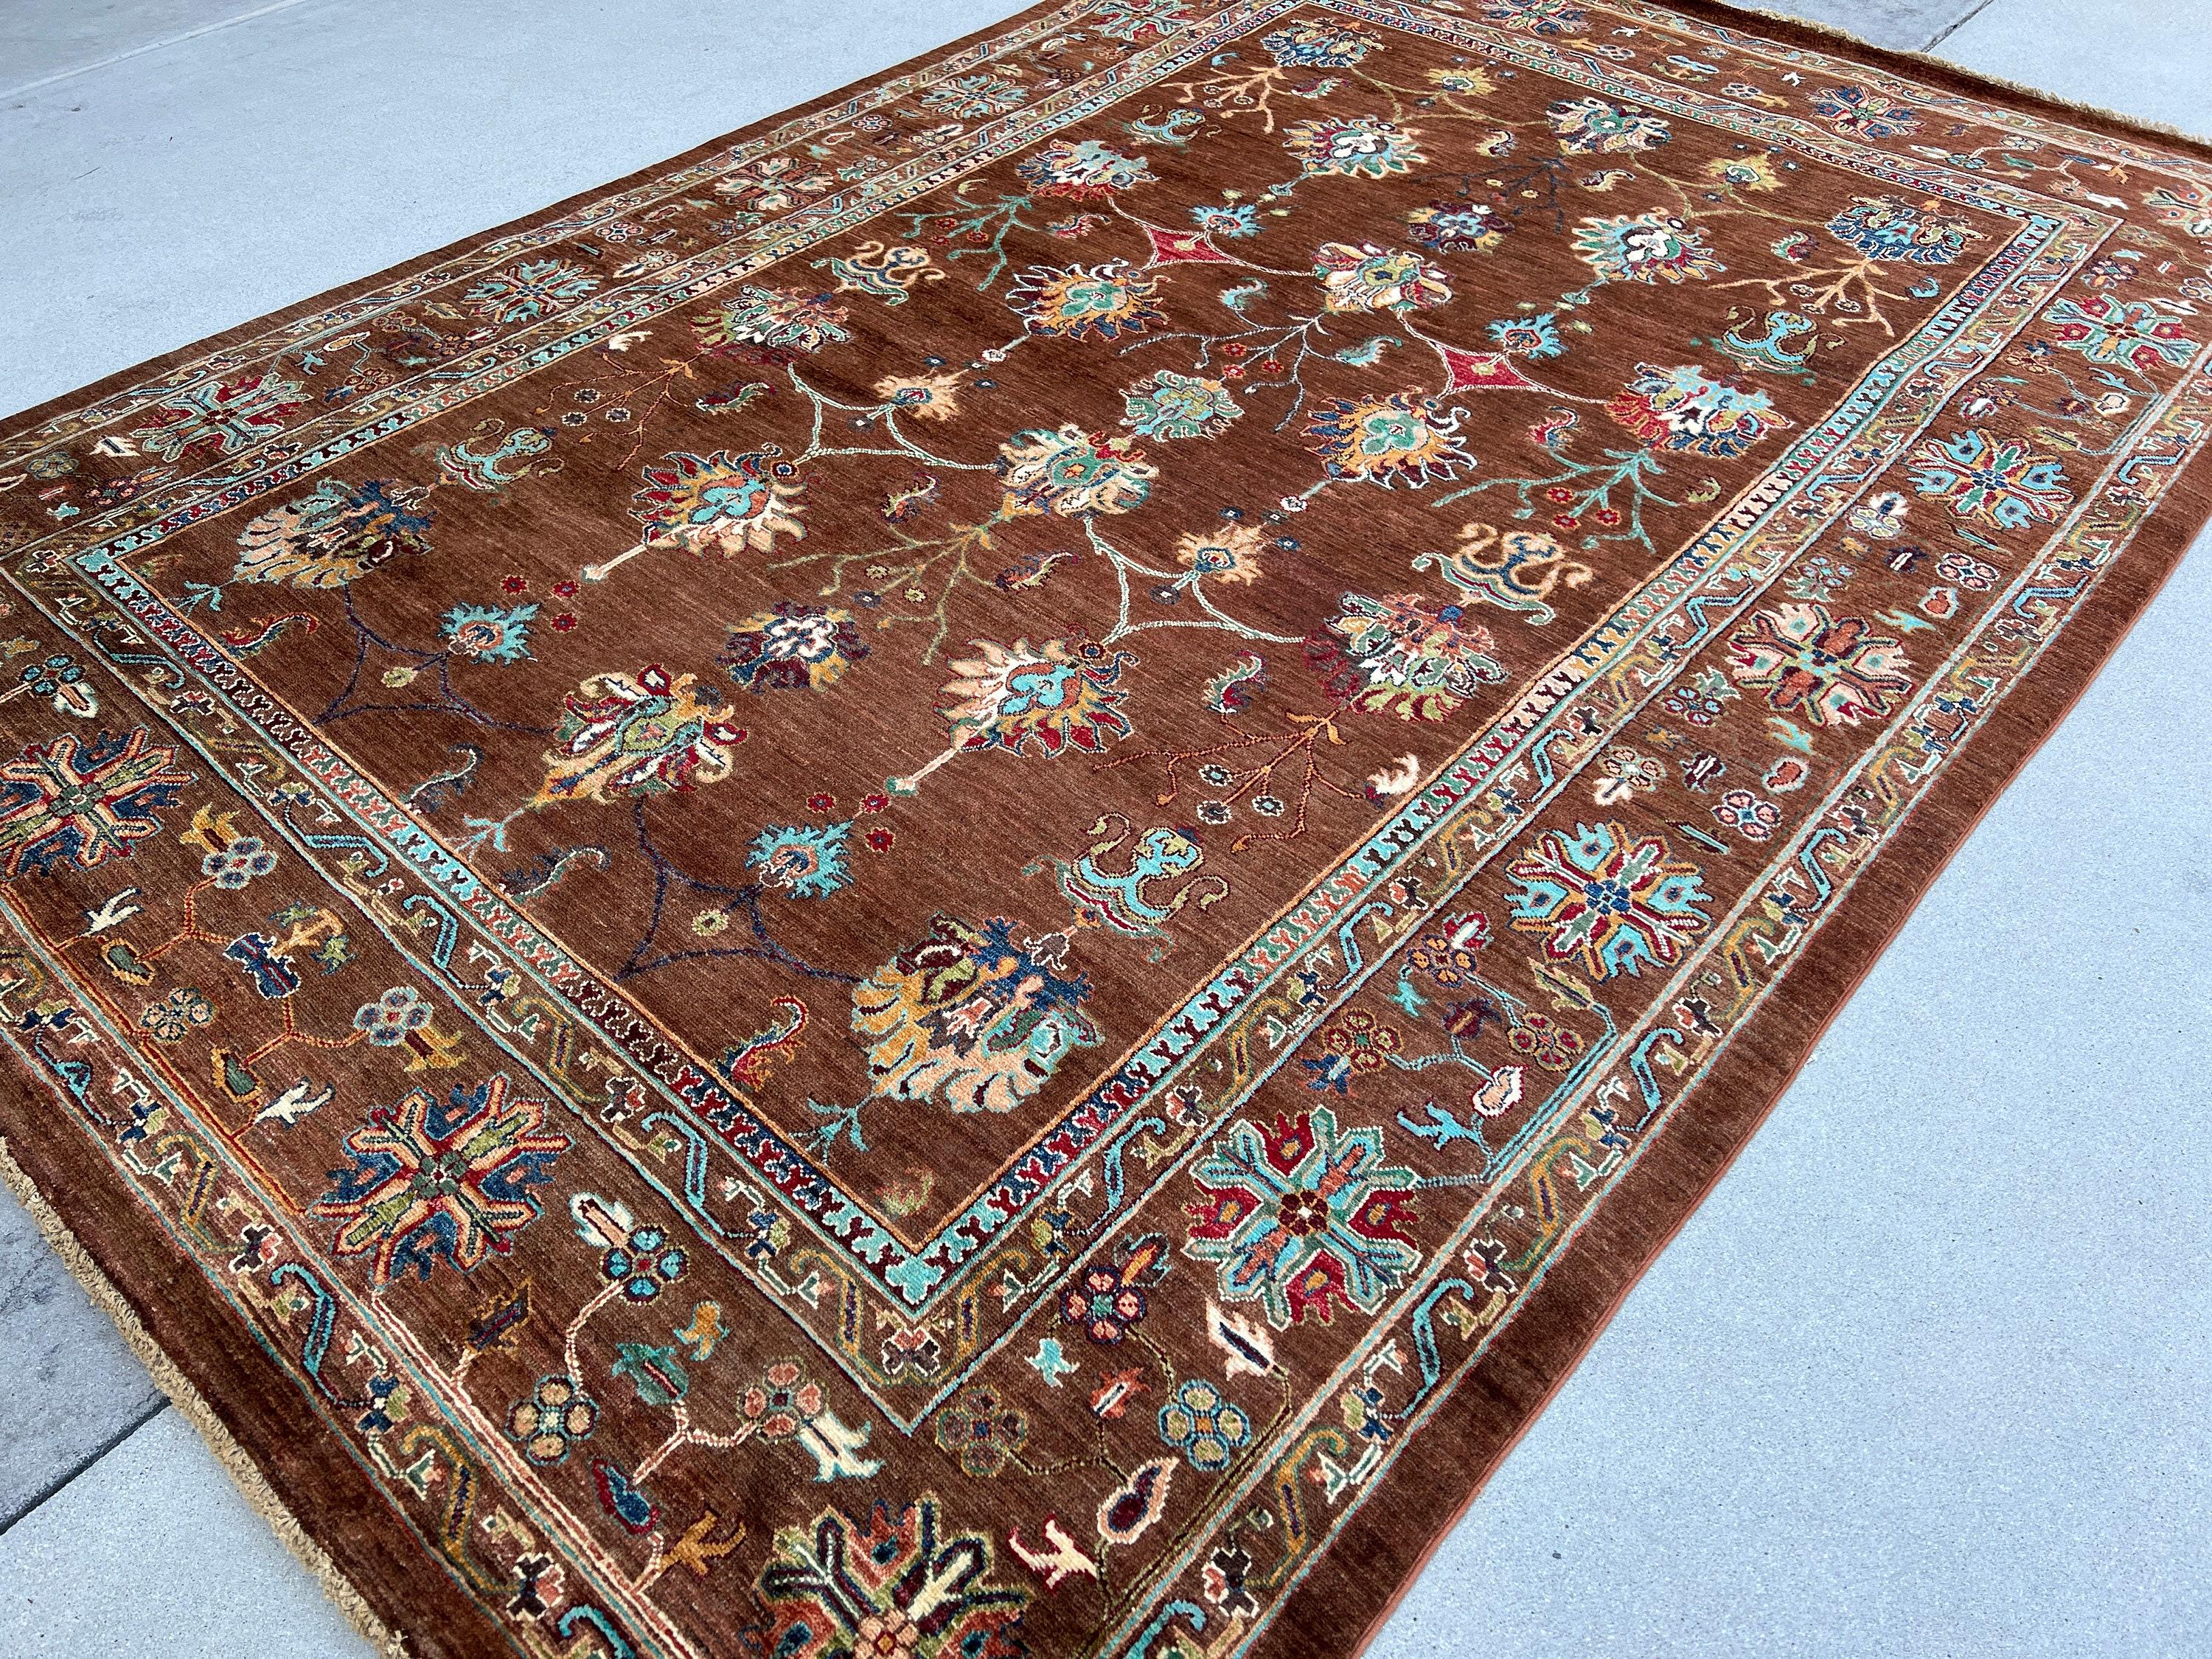 Contemporary Hand-Knotted Afghan Rug Premium Hand-Spun Afghan Wool Fair Trade For Sale